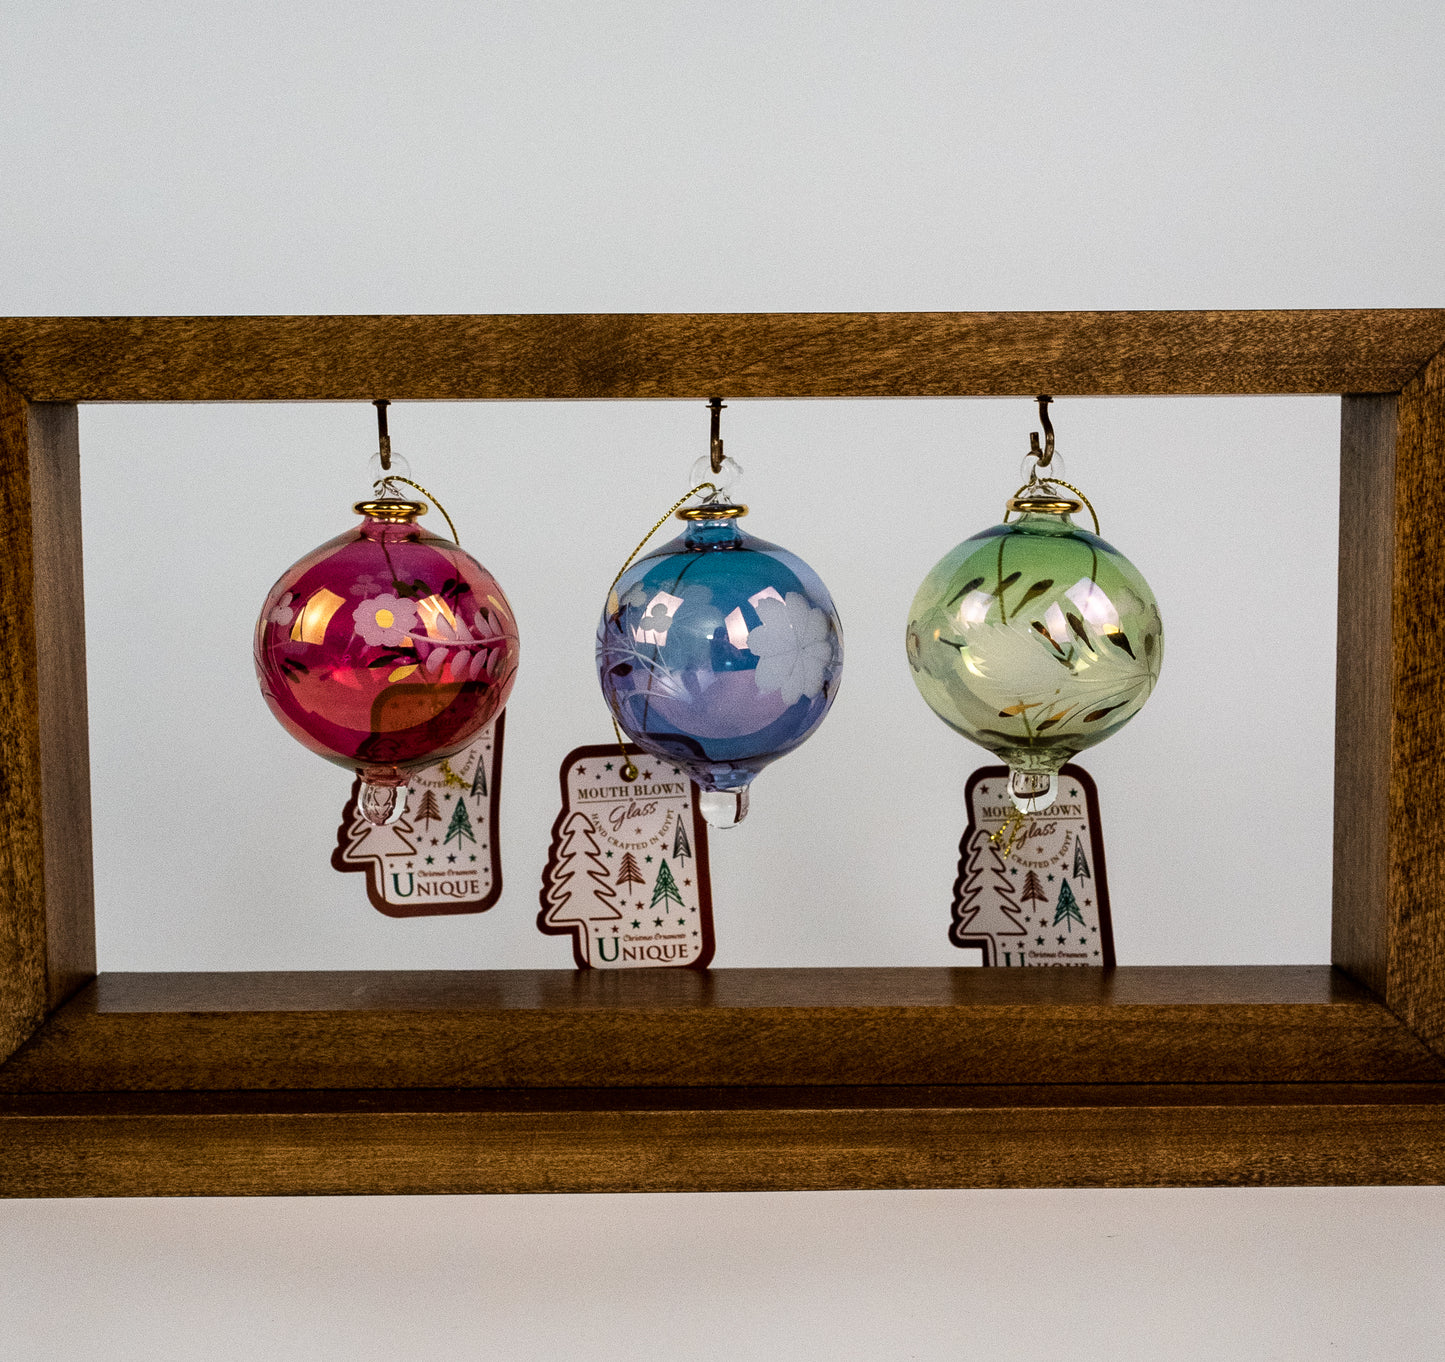 The Engraved Three Colors Bundle "Set Of Three Beautiful Ornaments"